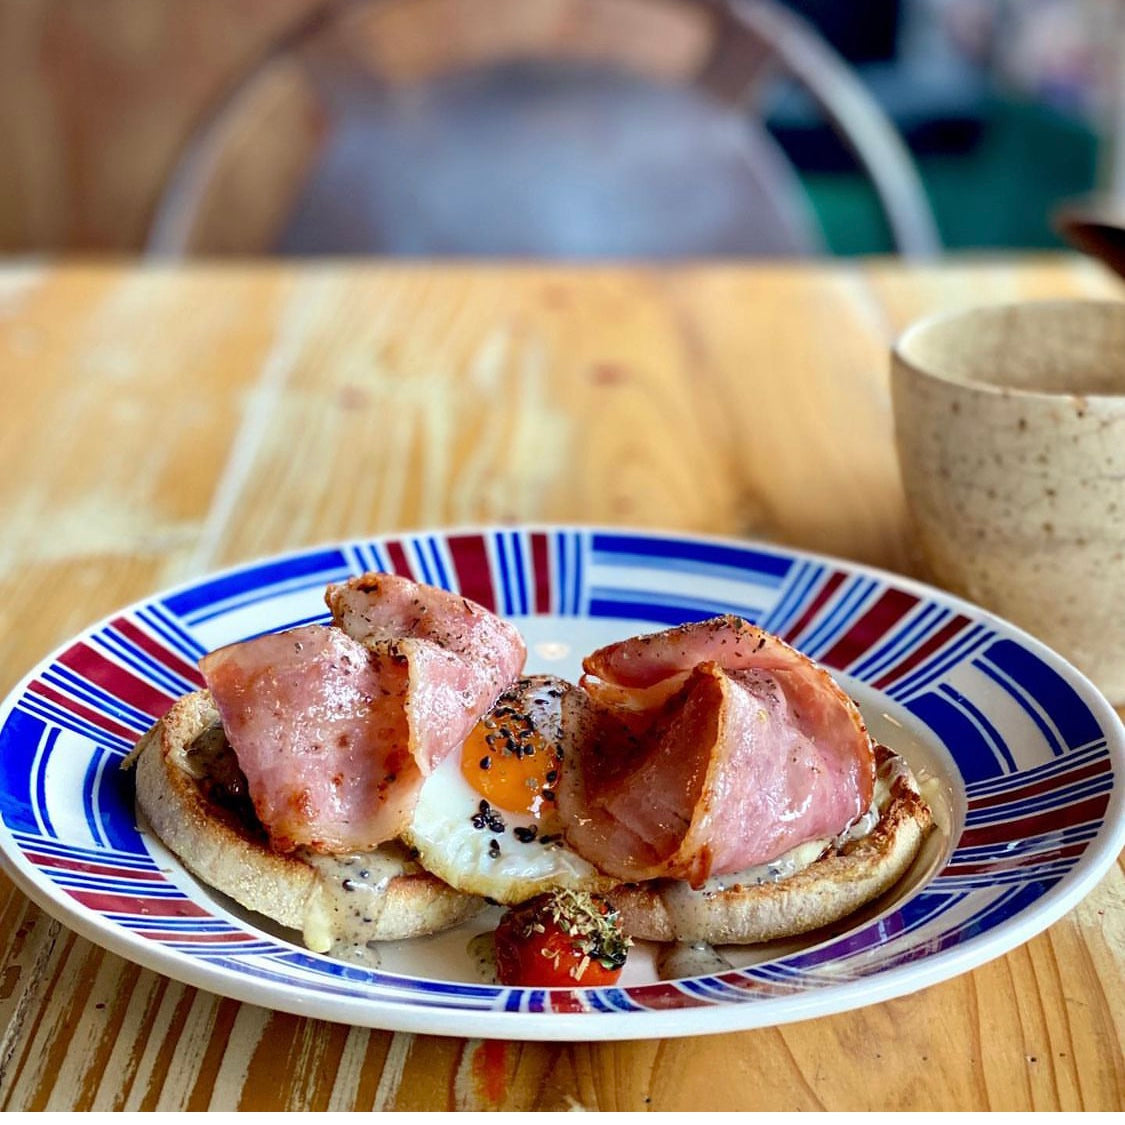 A toasted English muffin with egg, bacon and a cup of coffee